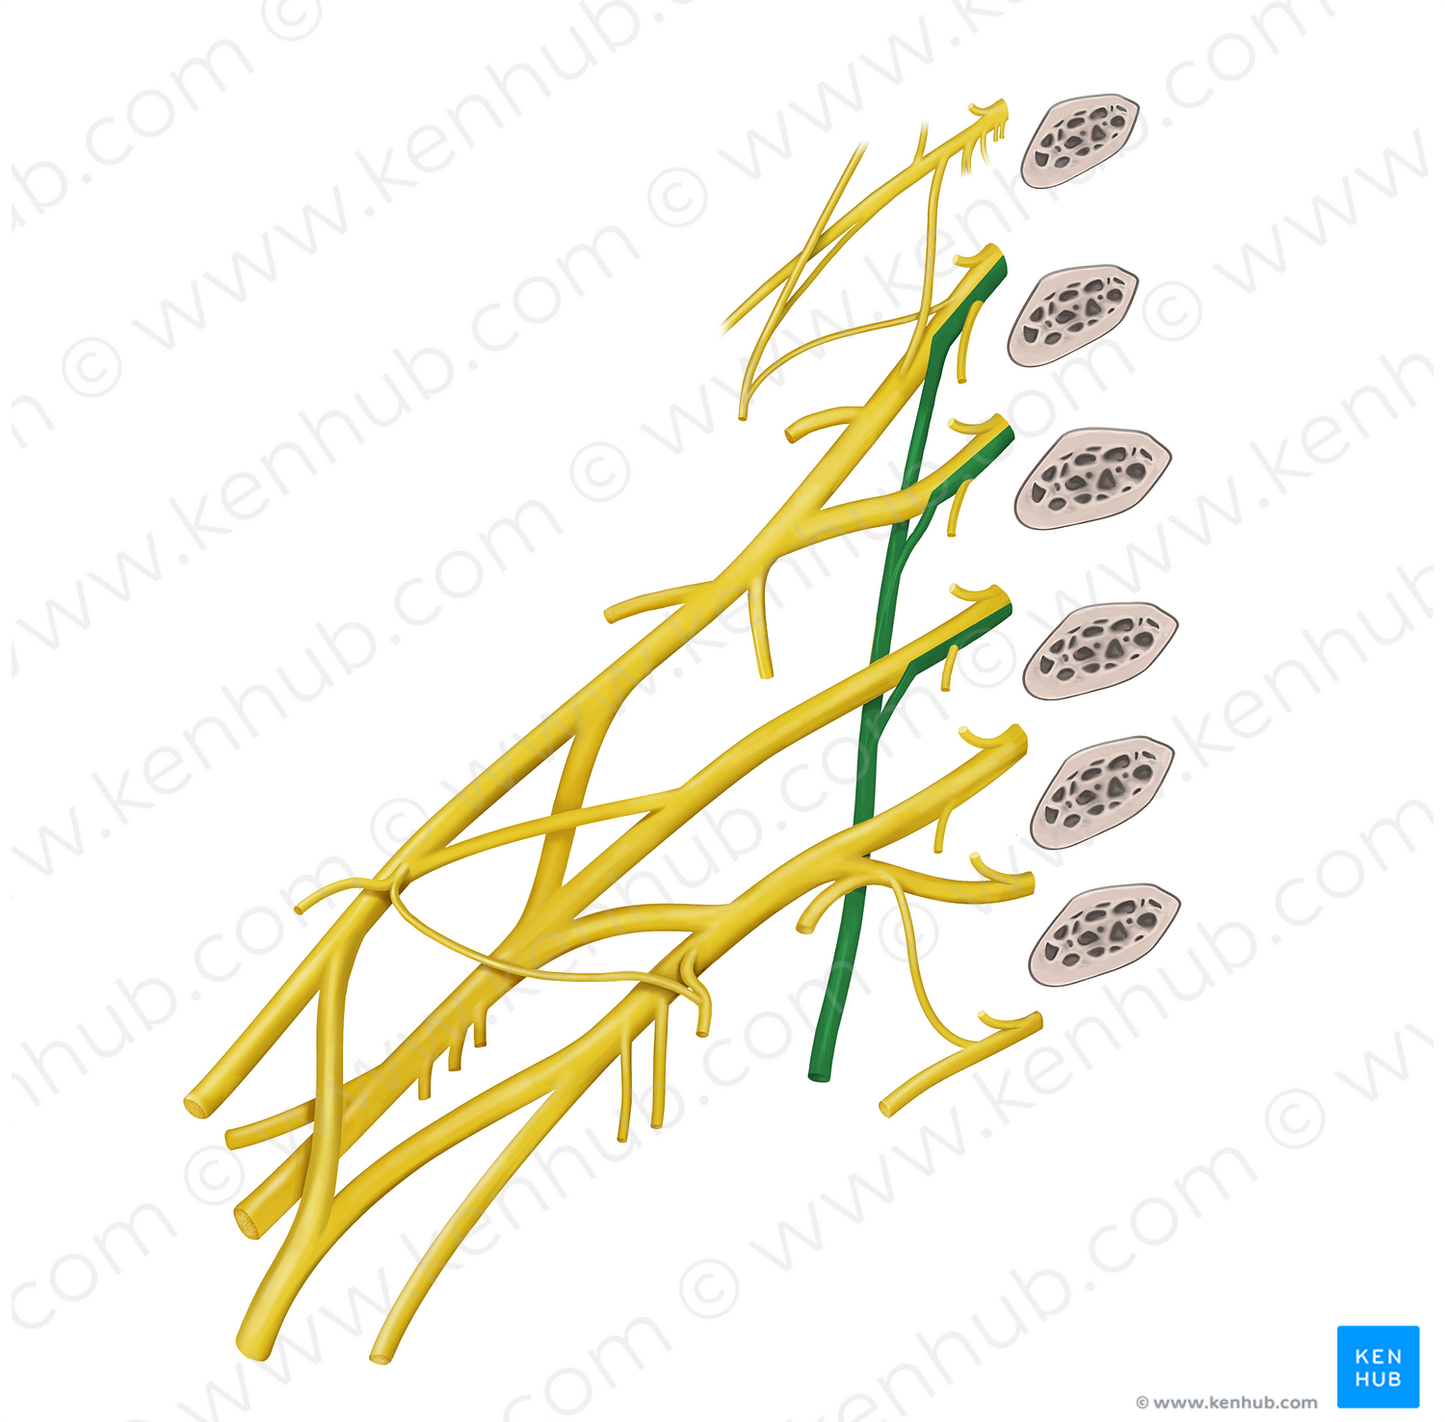 Long thoracic nerve (#6808)